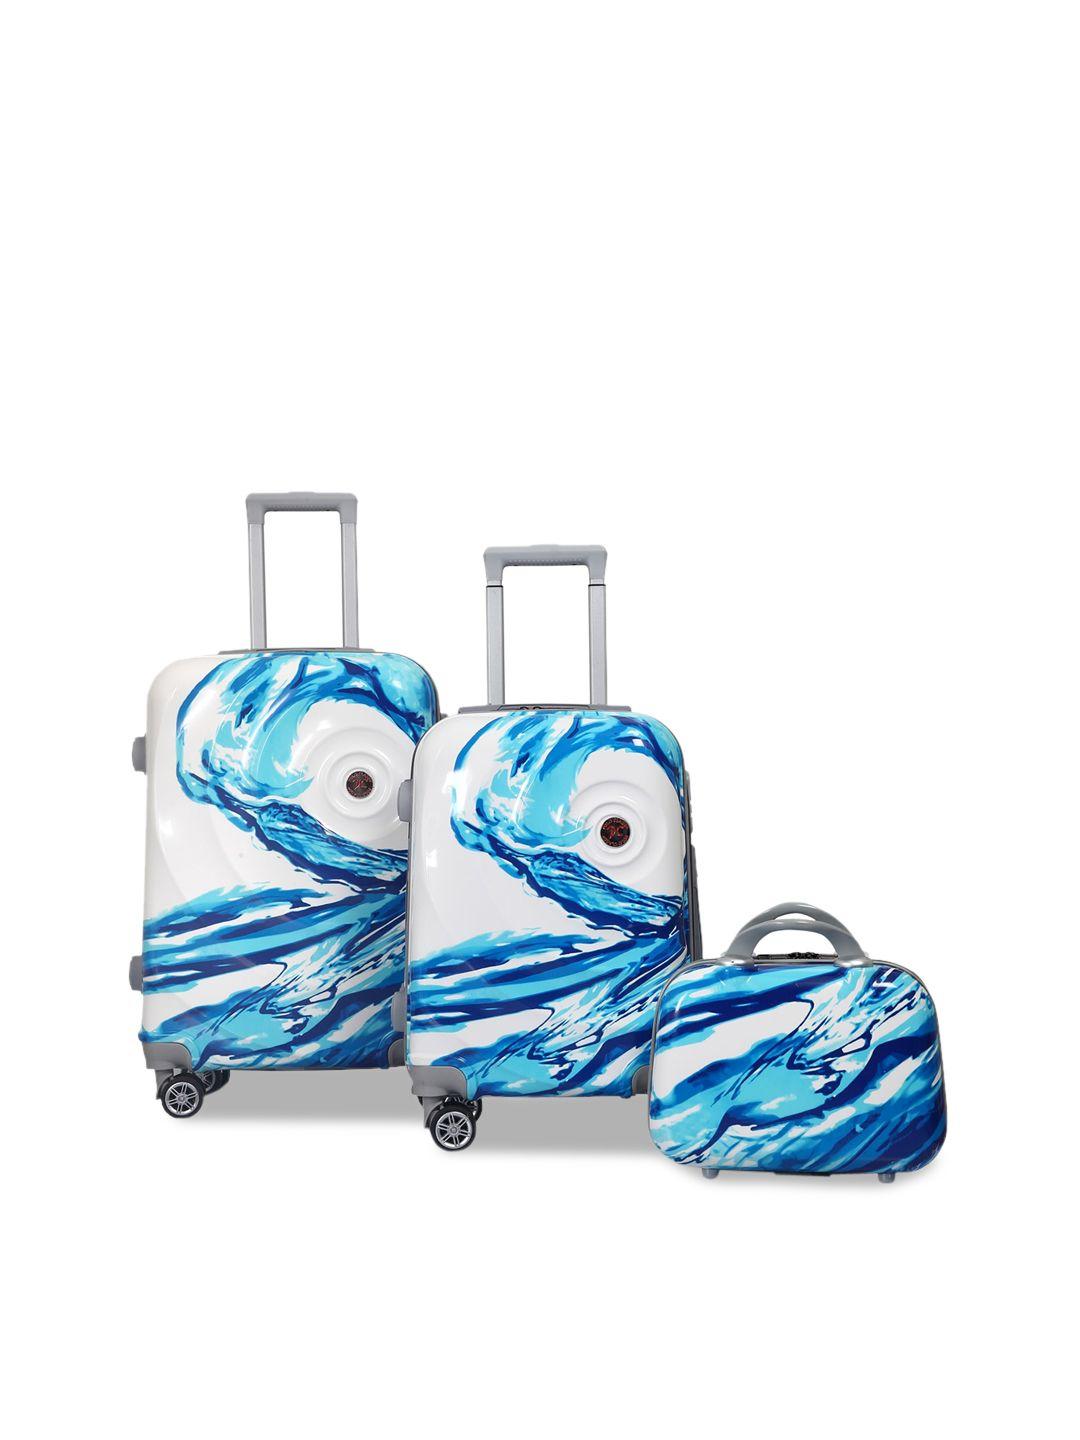 polo class white & blue set of 2 trolley bag with 1 vanity bag